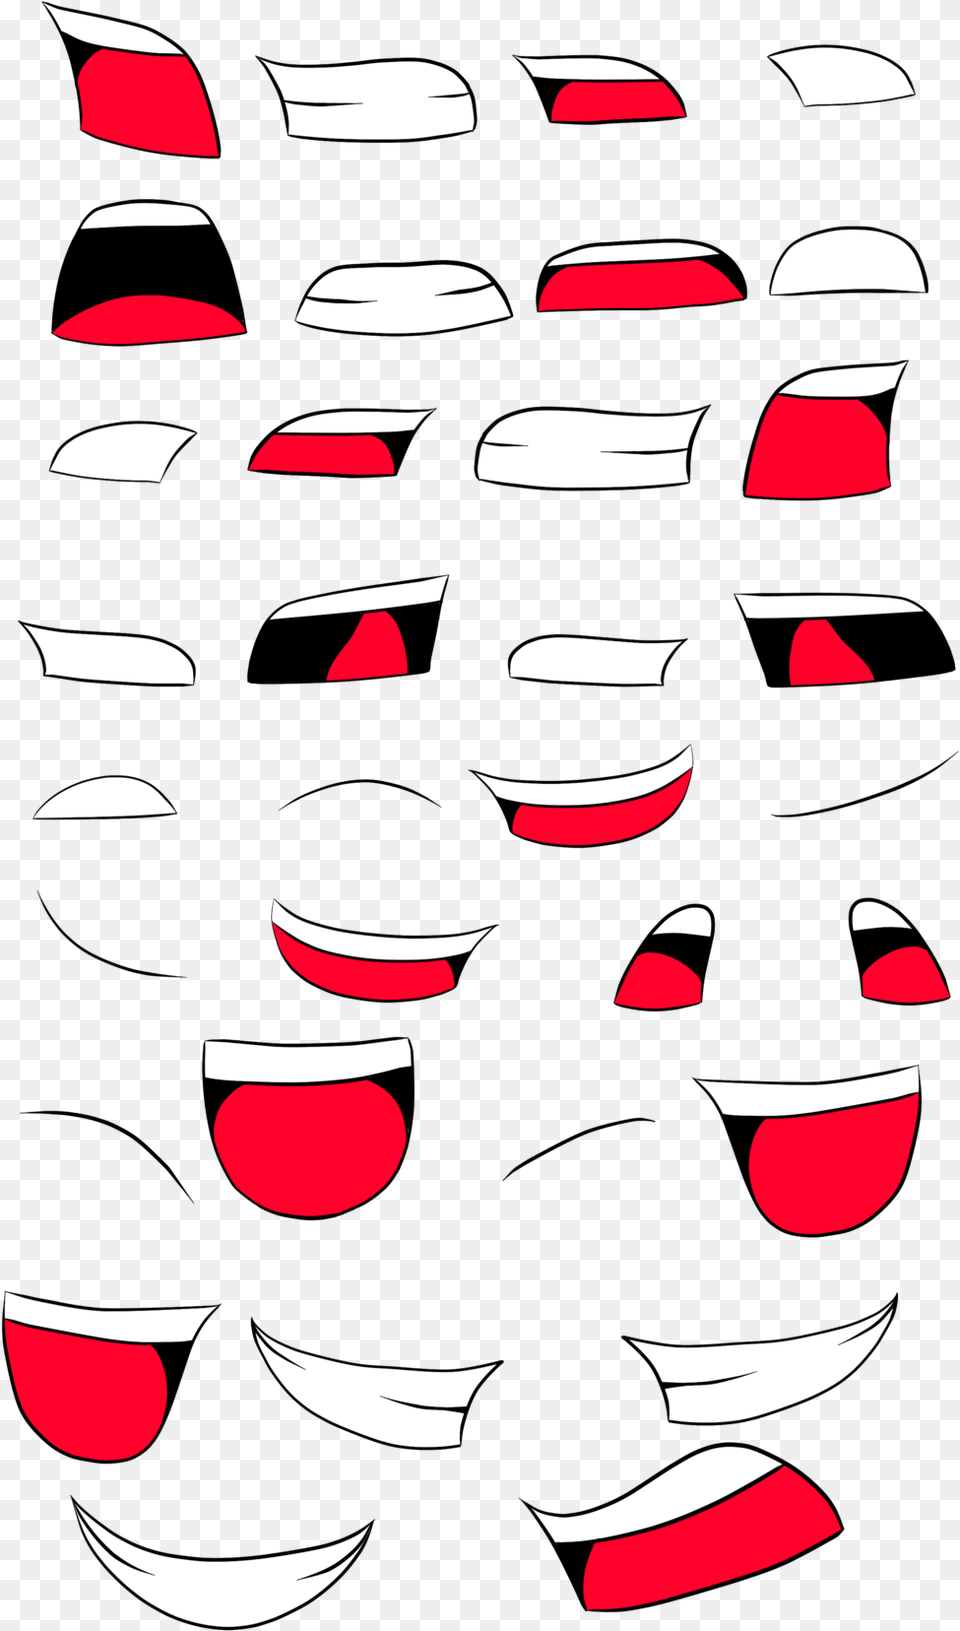 Anime Mouth For Anime Mouth, Art, Modern Art, Home Decor, Baby Free Png Download